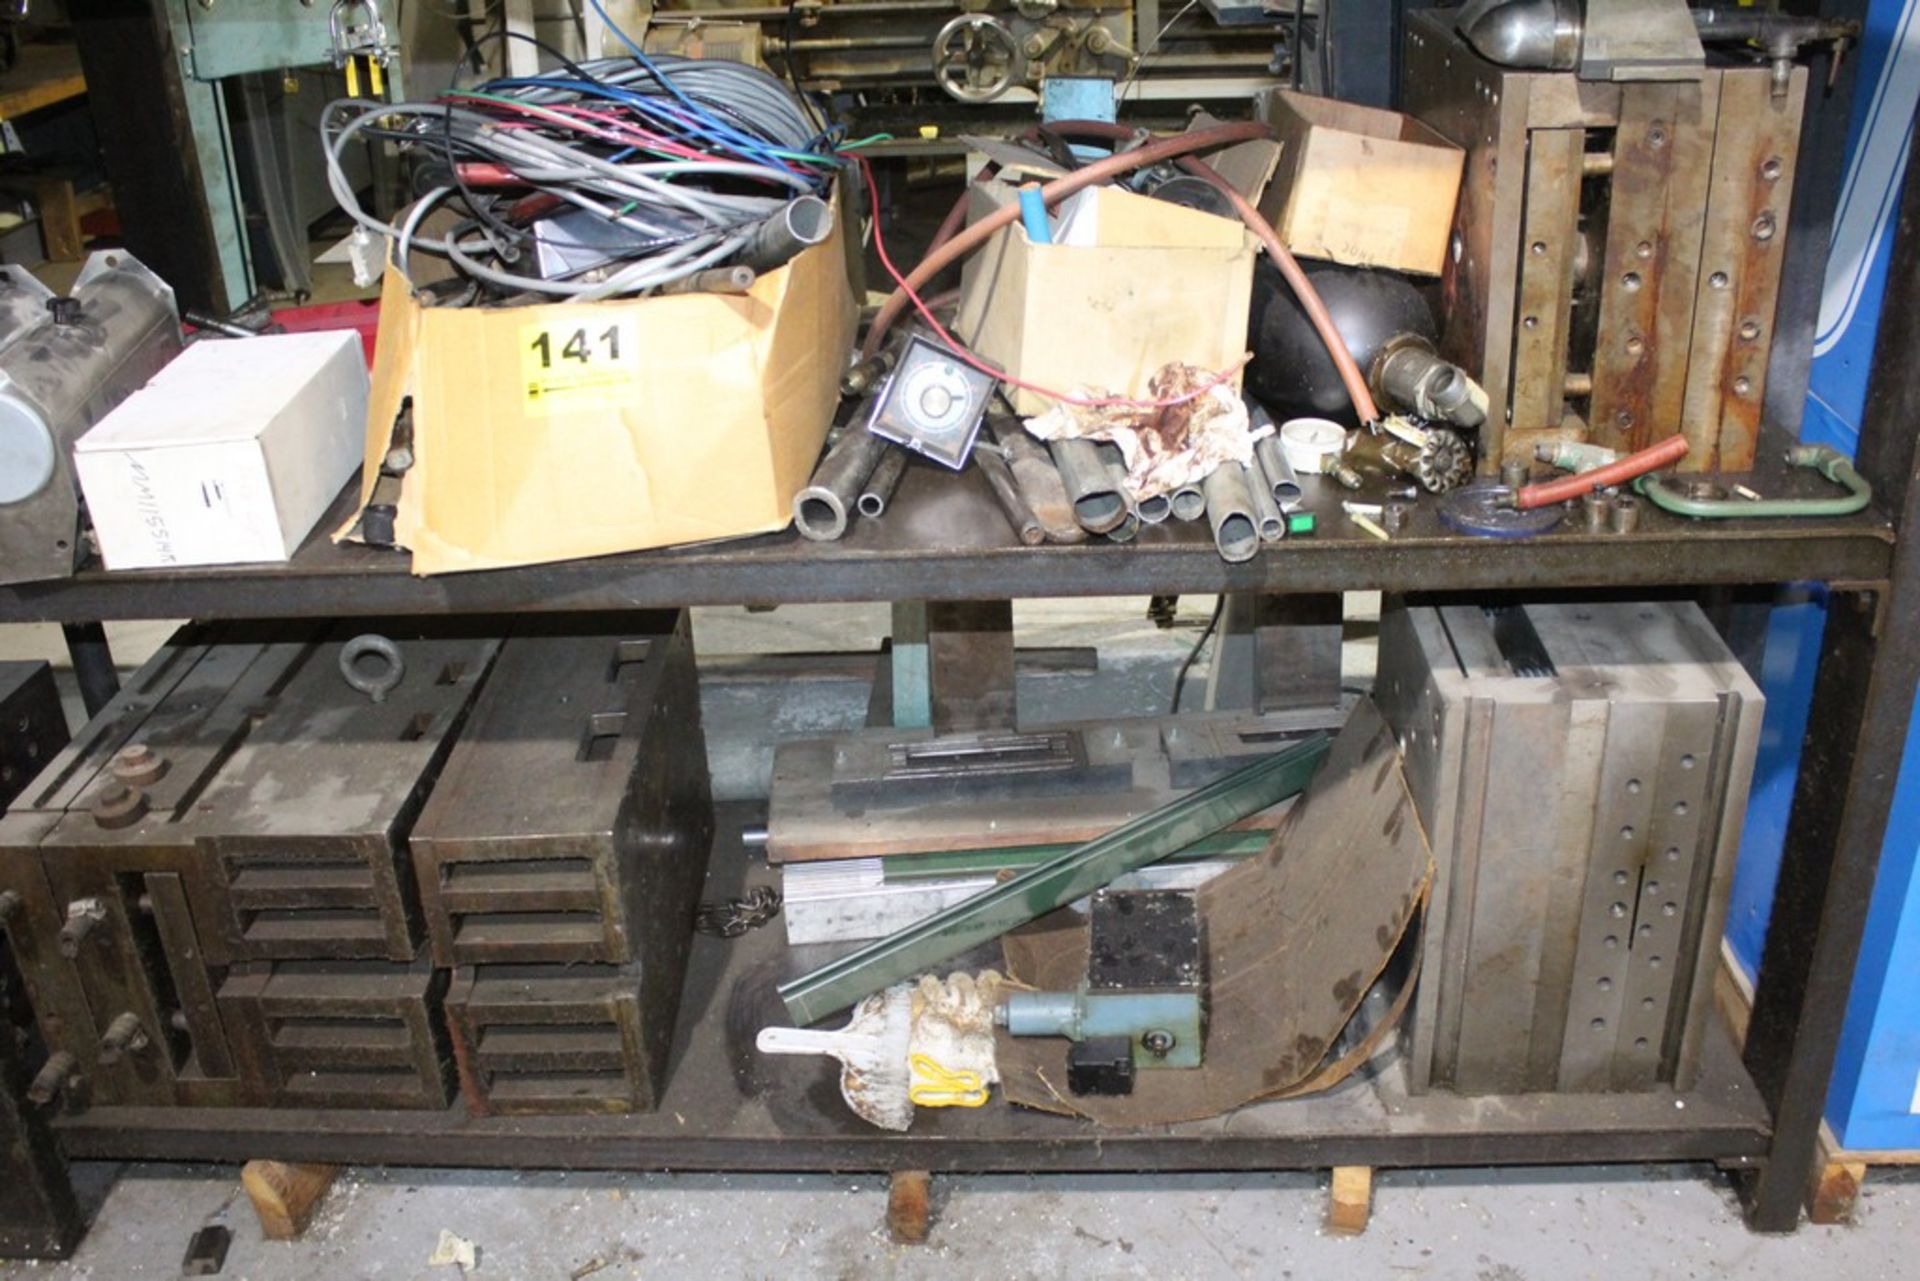 LARGE STEEL MOLD DIES AND ACCESSORIES ON (8) LOWER SHELVES - Image 6 of 6